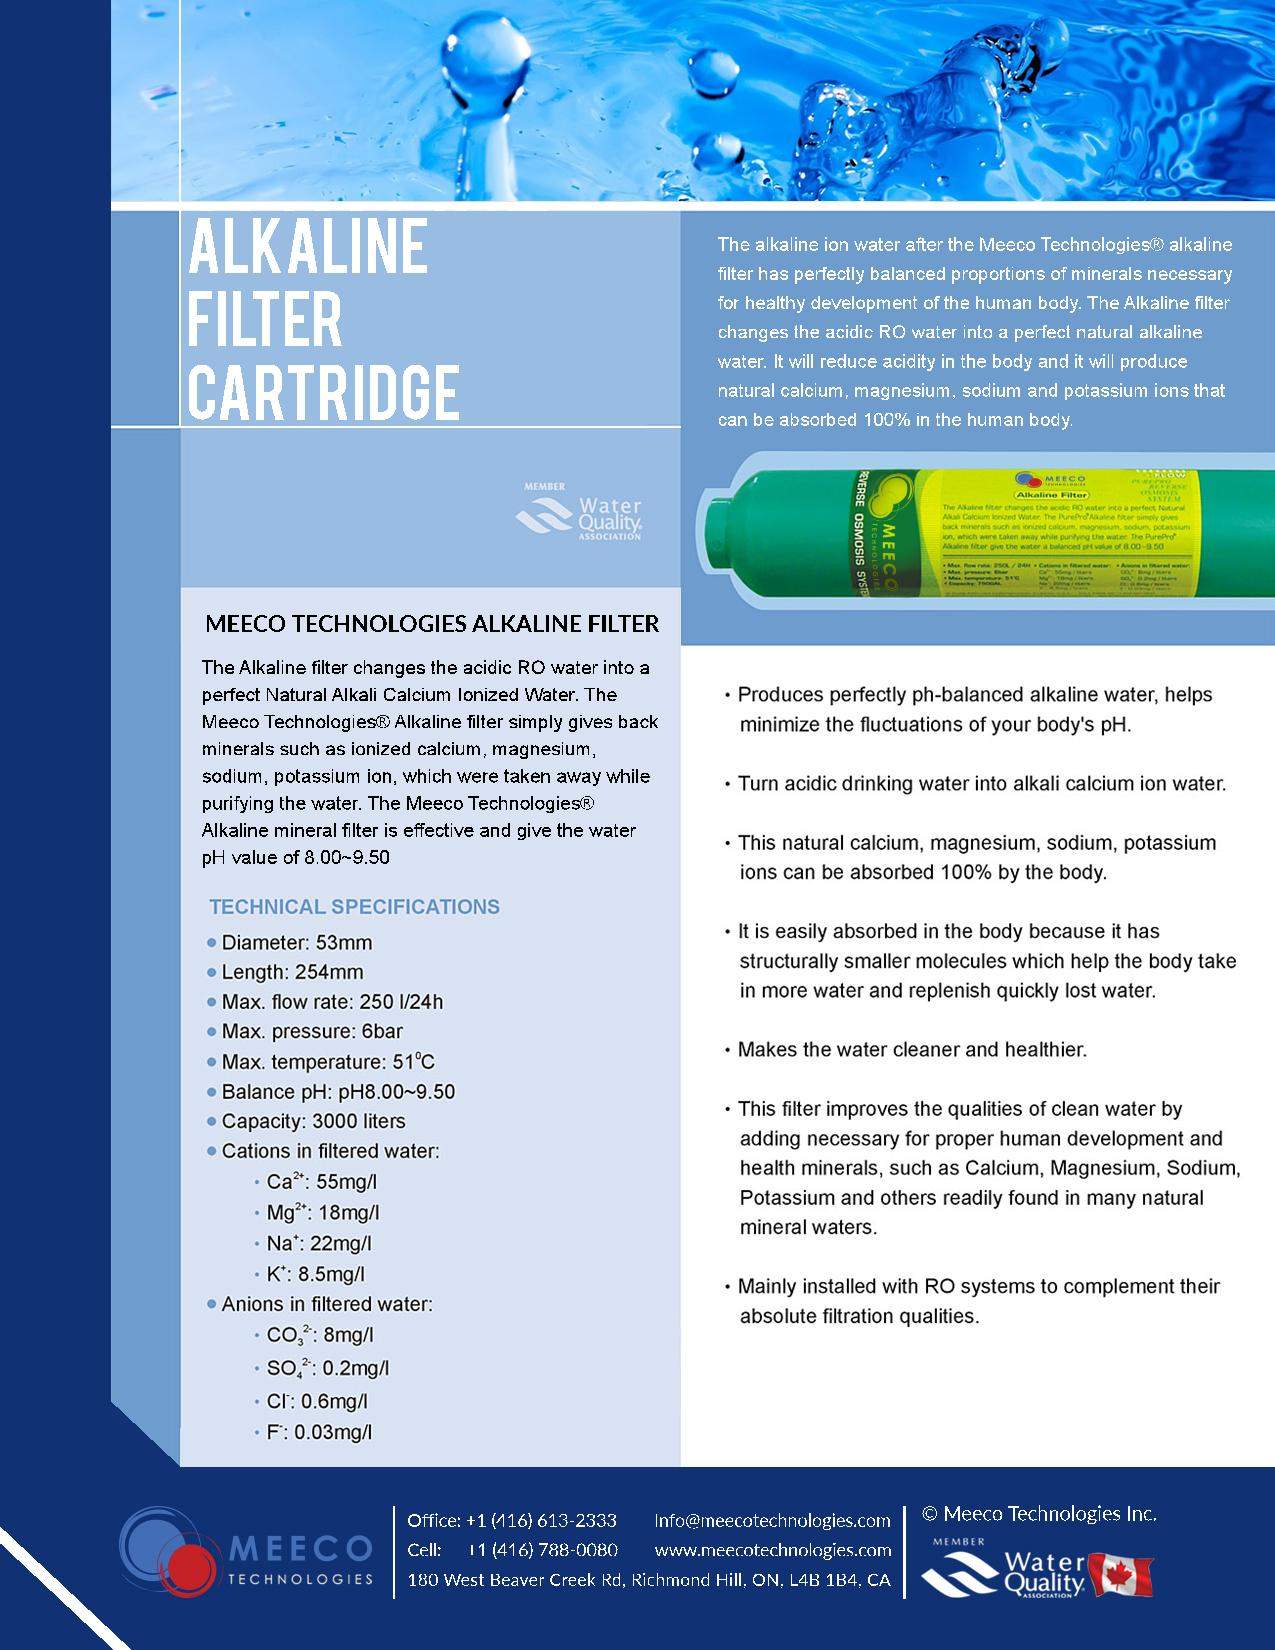 The Alkaline filter changes the acidic RO water into a perfect Natural Alkaline Ion Water.